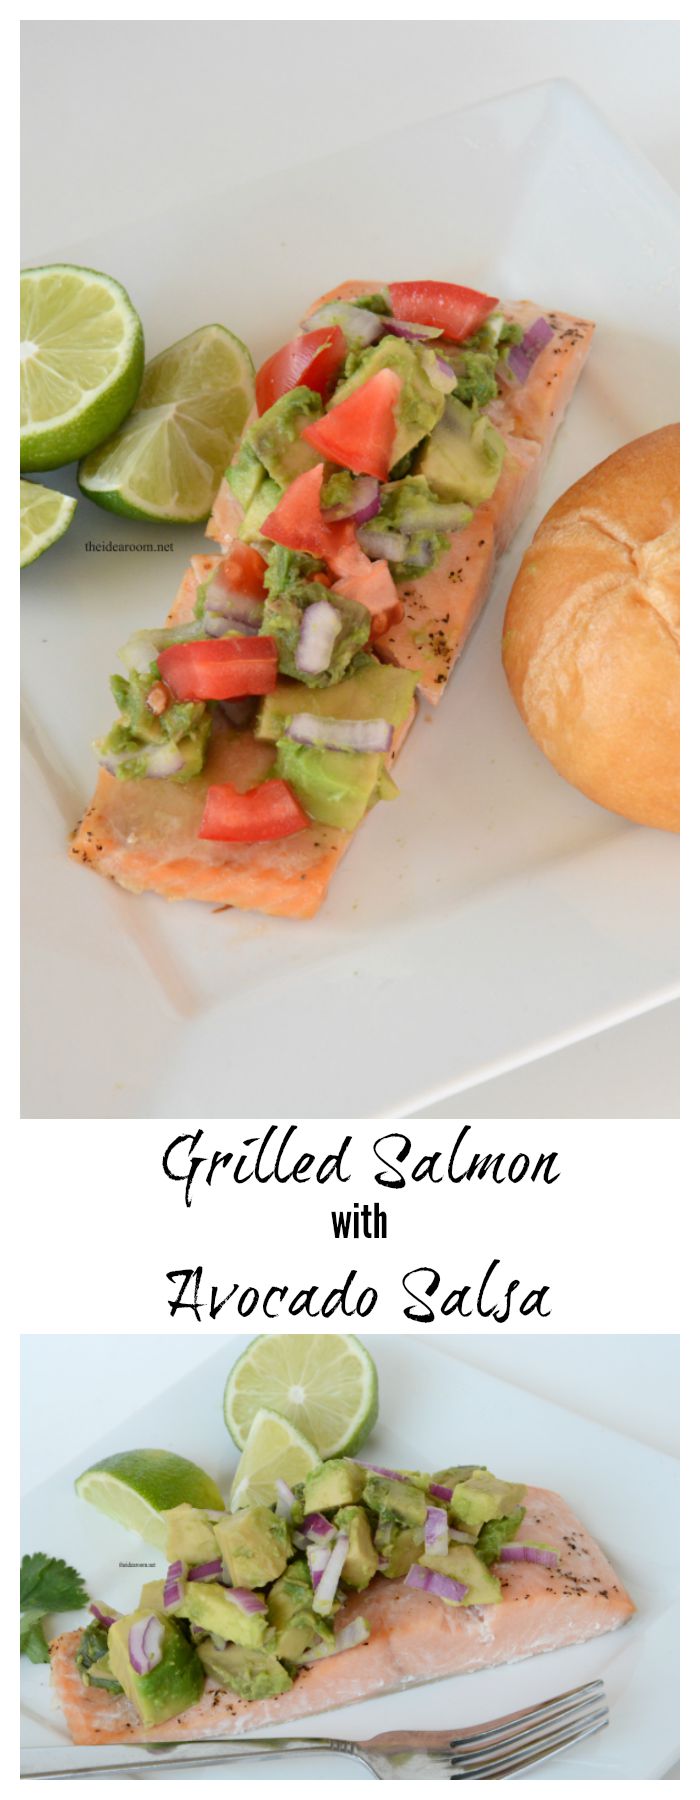 Grilled-Salmon-with-Avocado-Salsa-Recipe